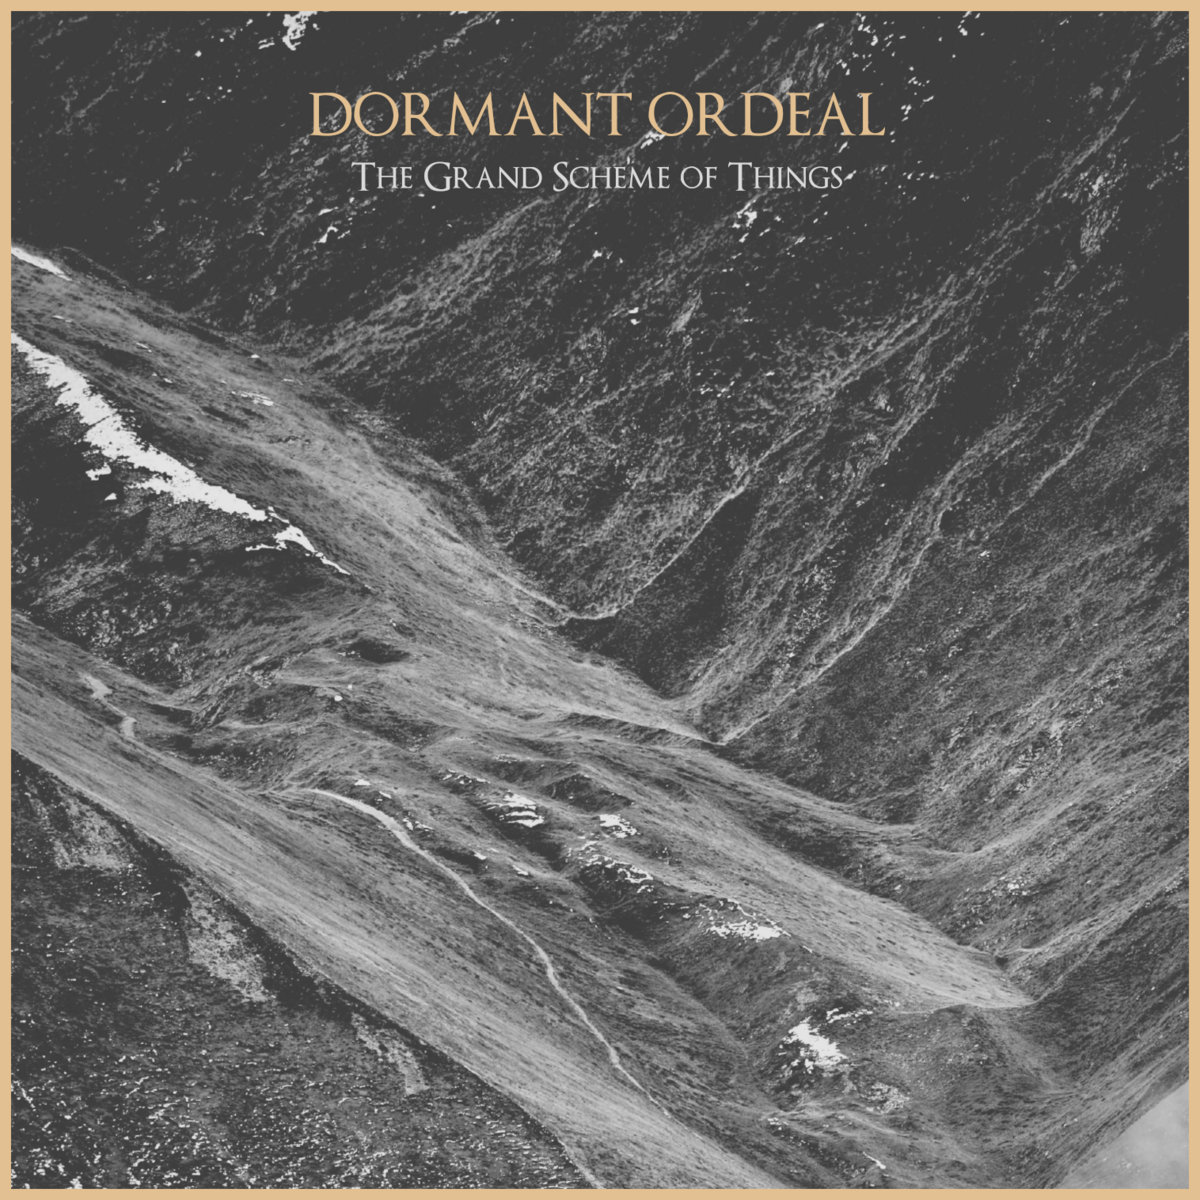 DORMANT ORDEAL - "THE GRAND SCHEME OF THINGS" LP